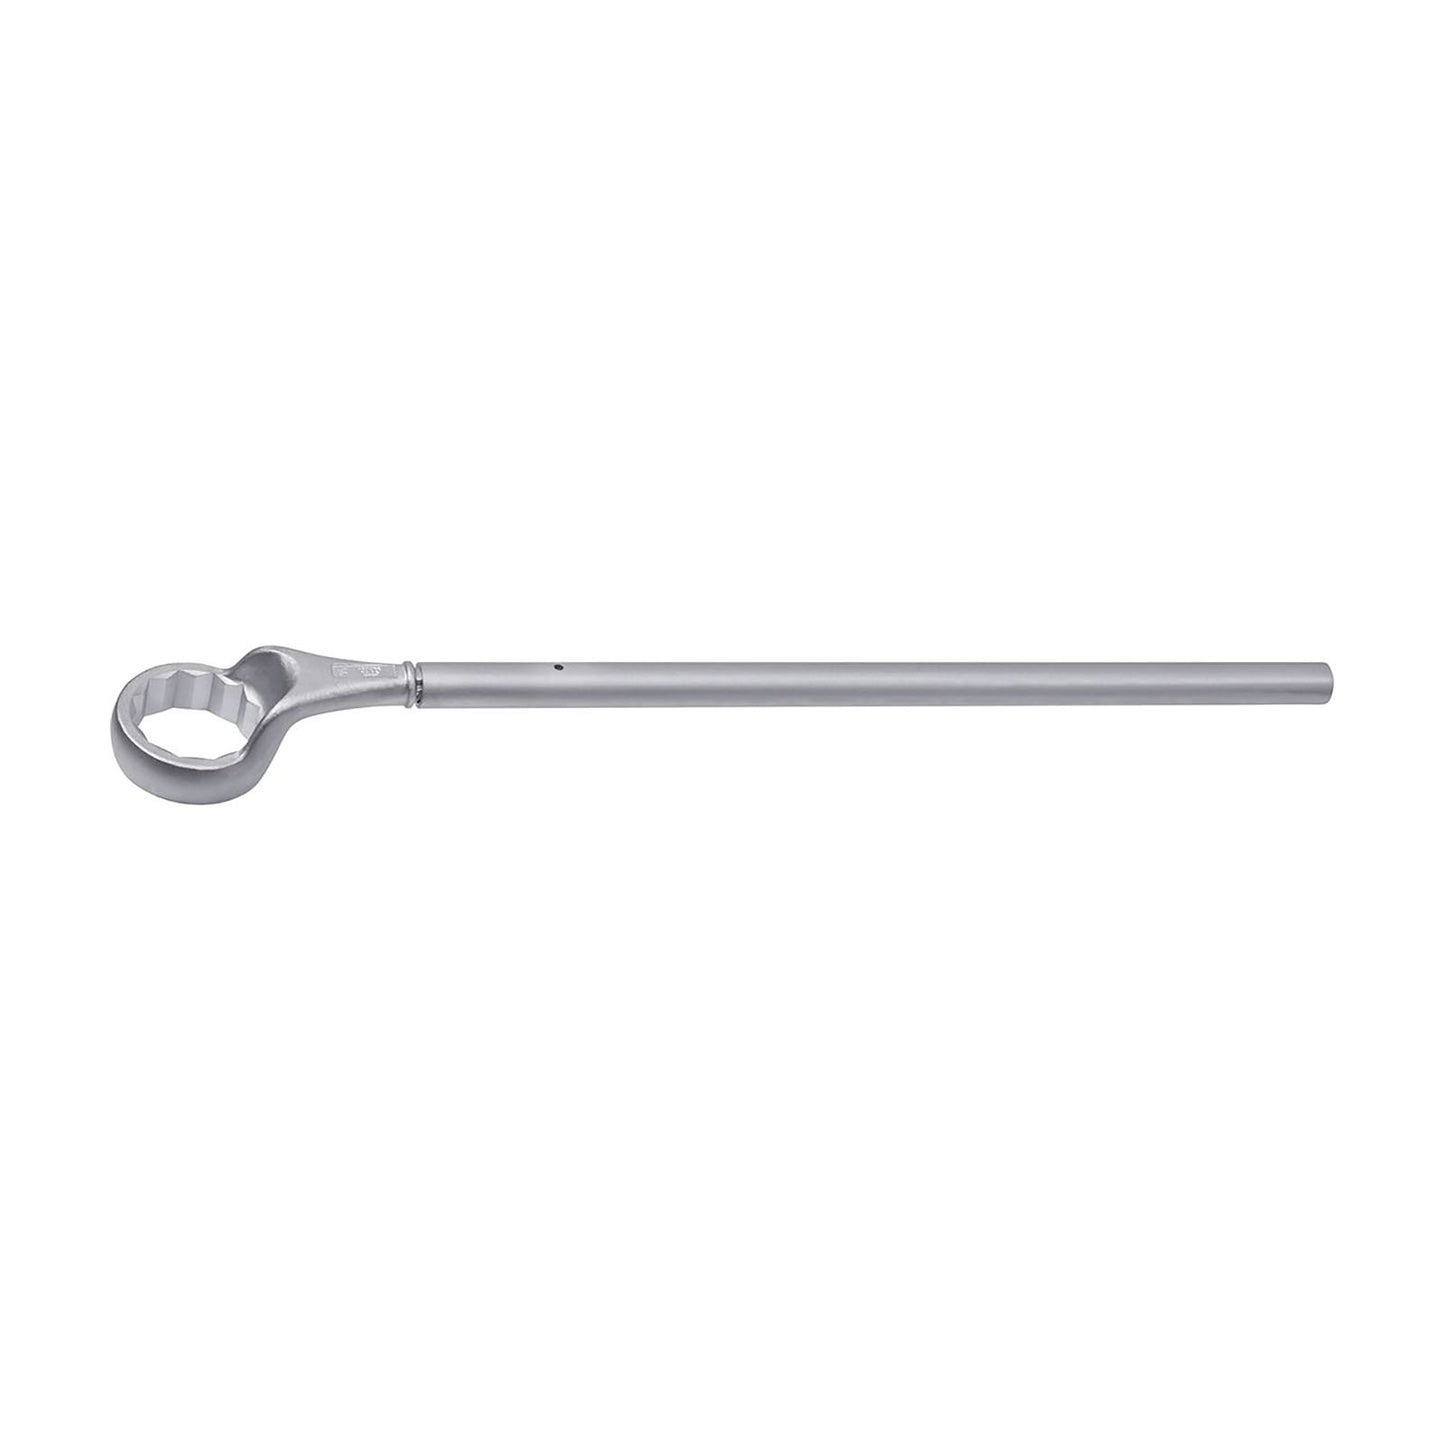 GEDORE 2 A 90 - Traction Wrench, 90mm (6035540)